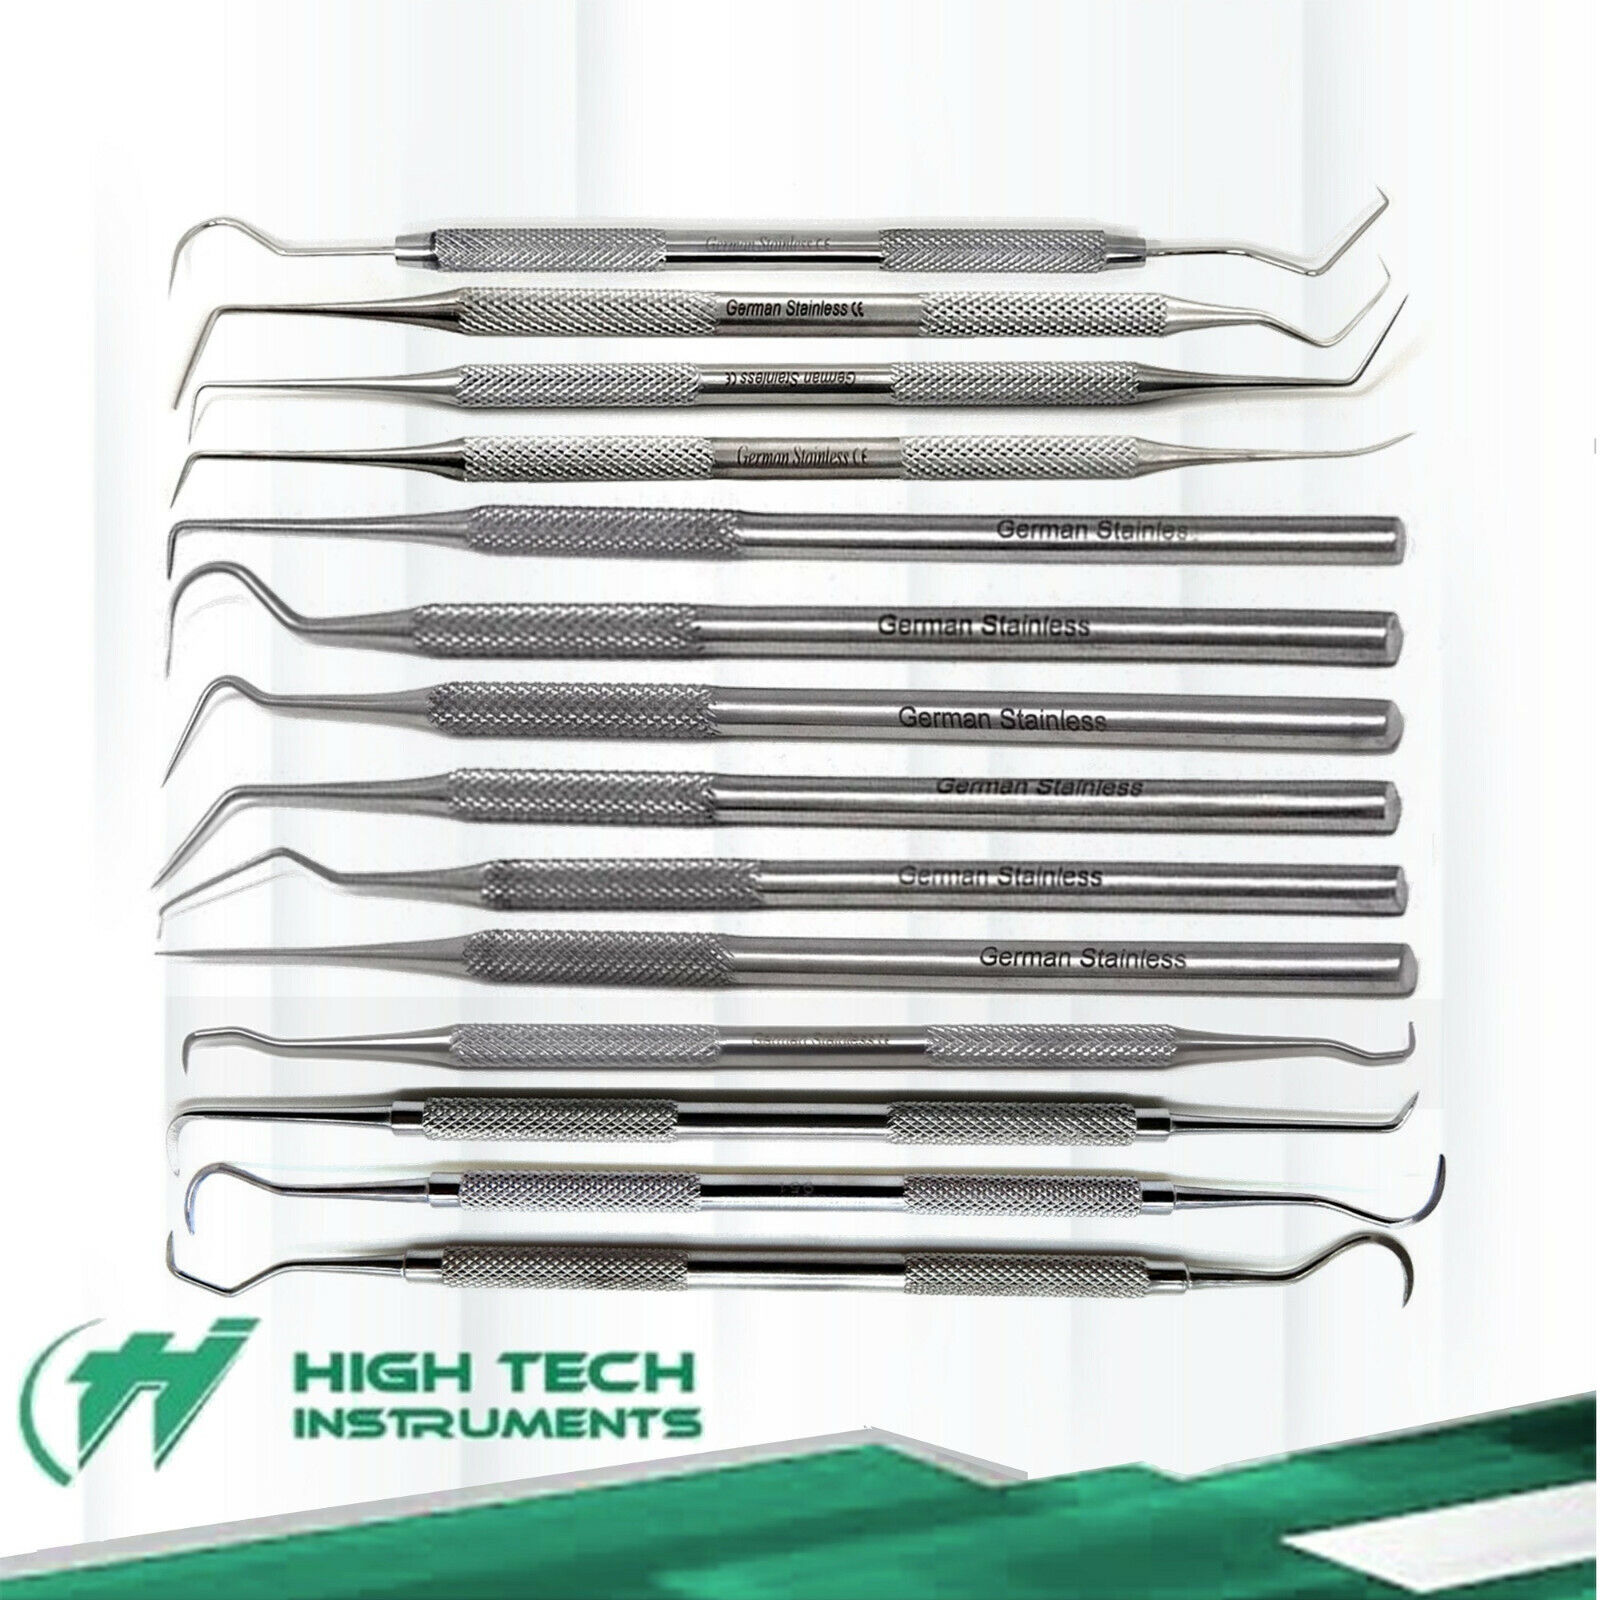 14pc STAINLESS STEEL Dental PICK SET, Tools Pick Scaler Teeth Cleaning Tooth hti brand Does Not Apply